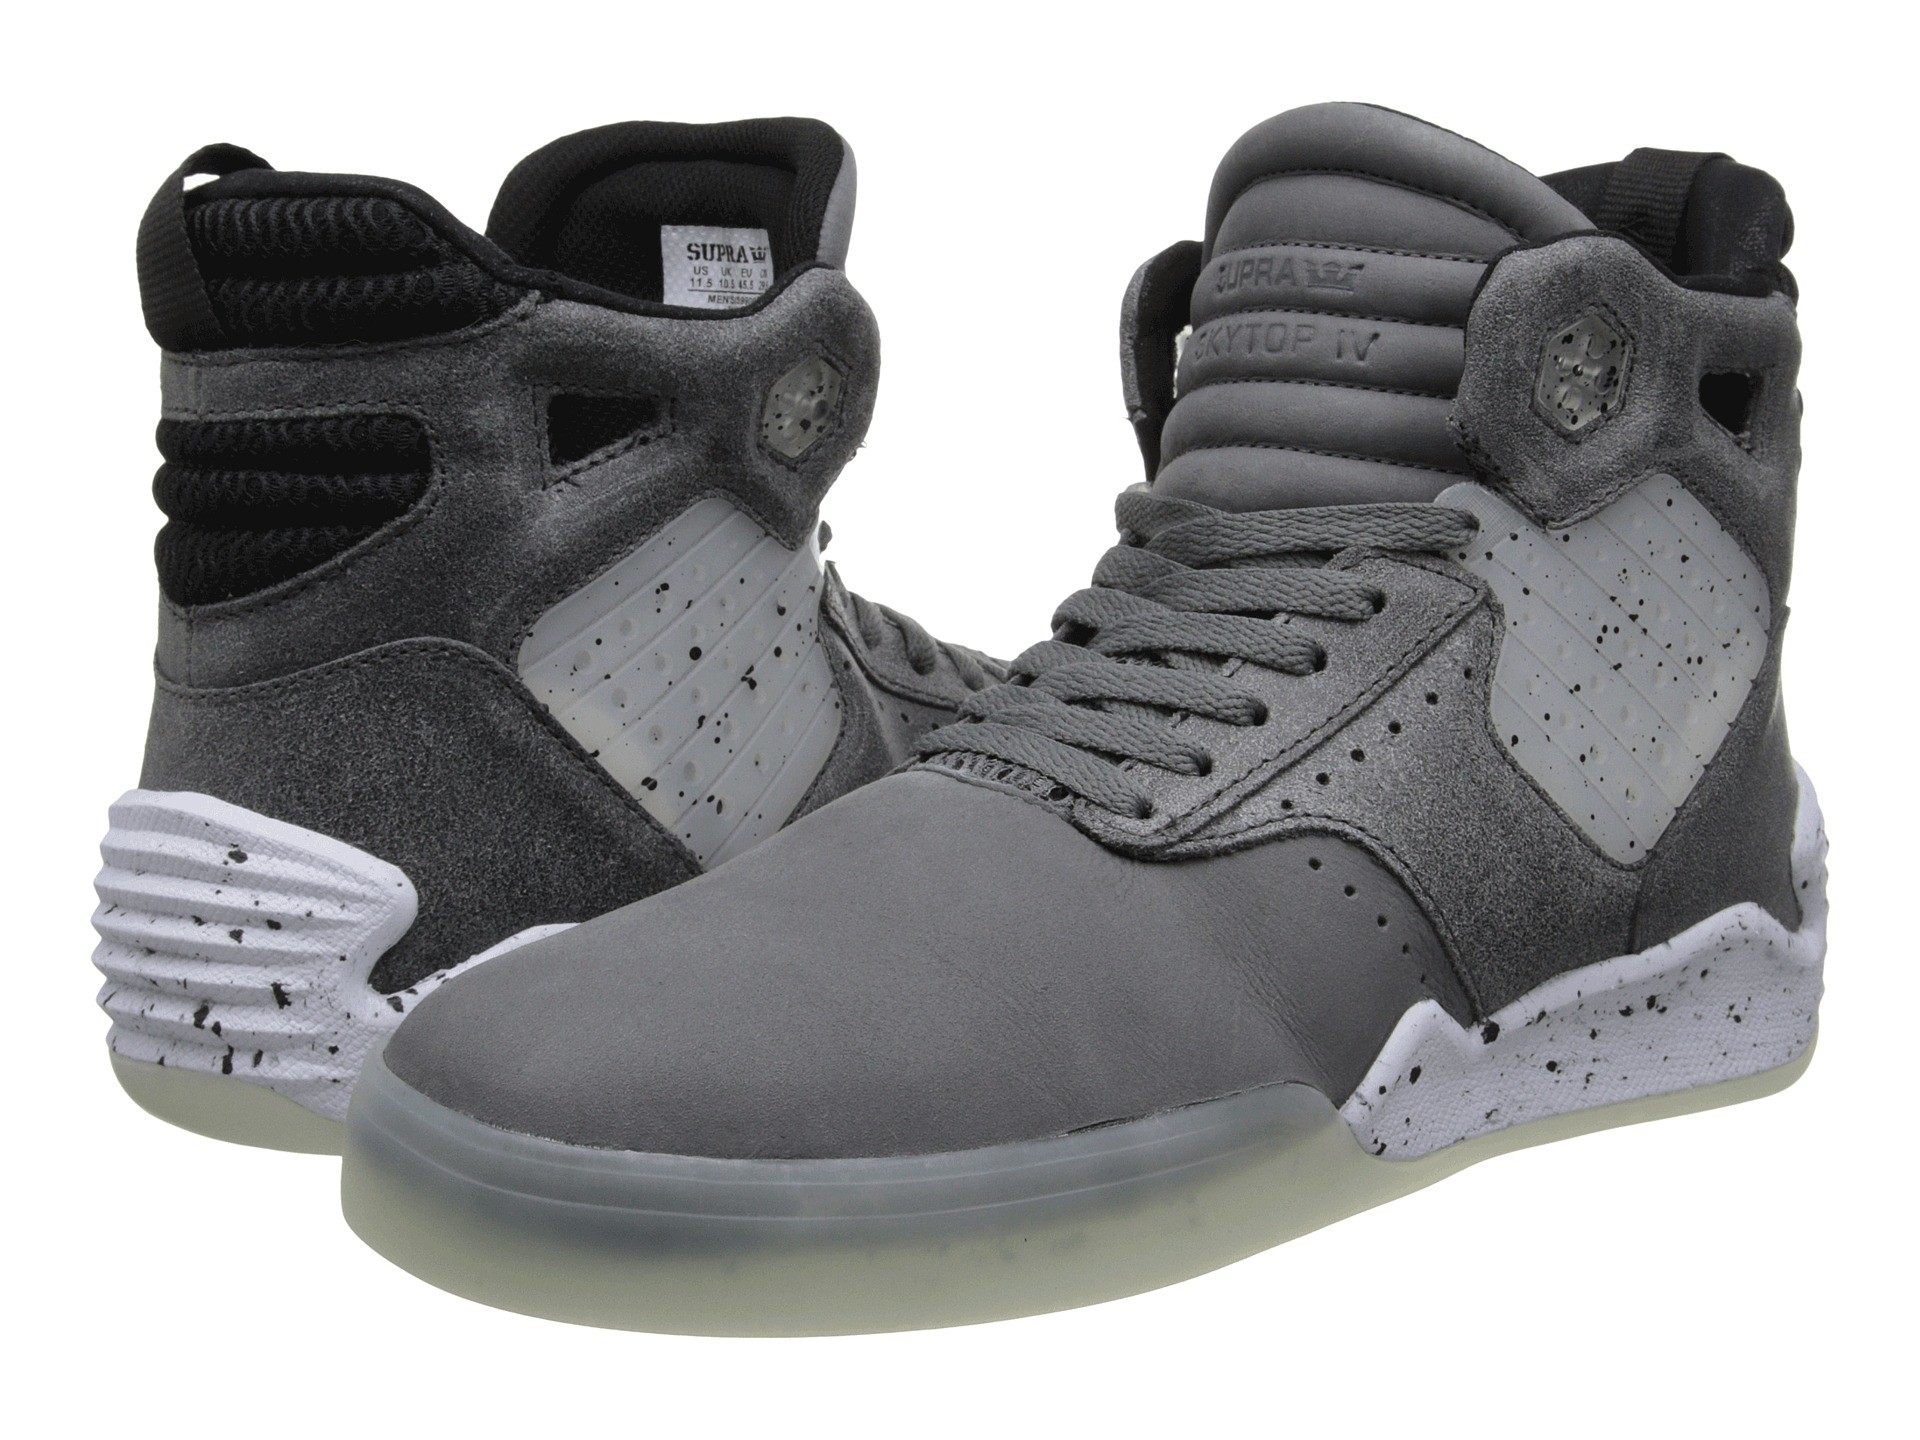 1920x1440 Charcoal/Black/White Supra Skytop IV Shoes For sale,supra logo,Big discount  on sale